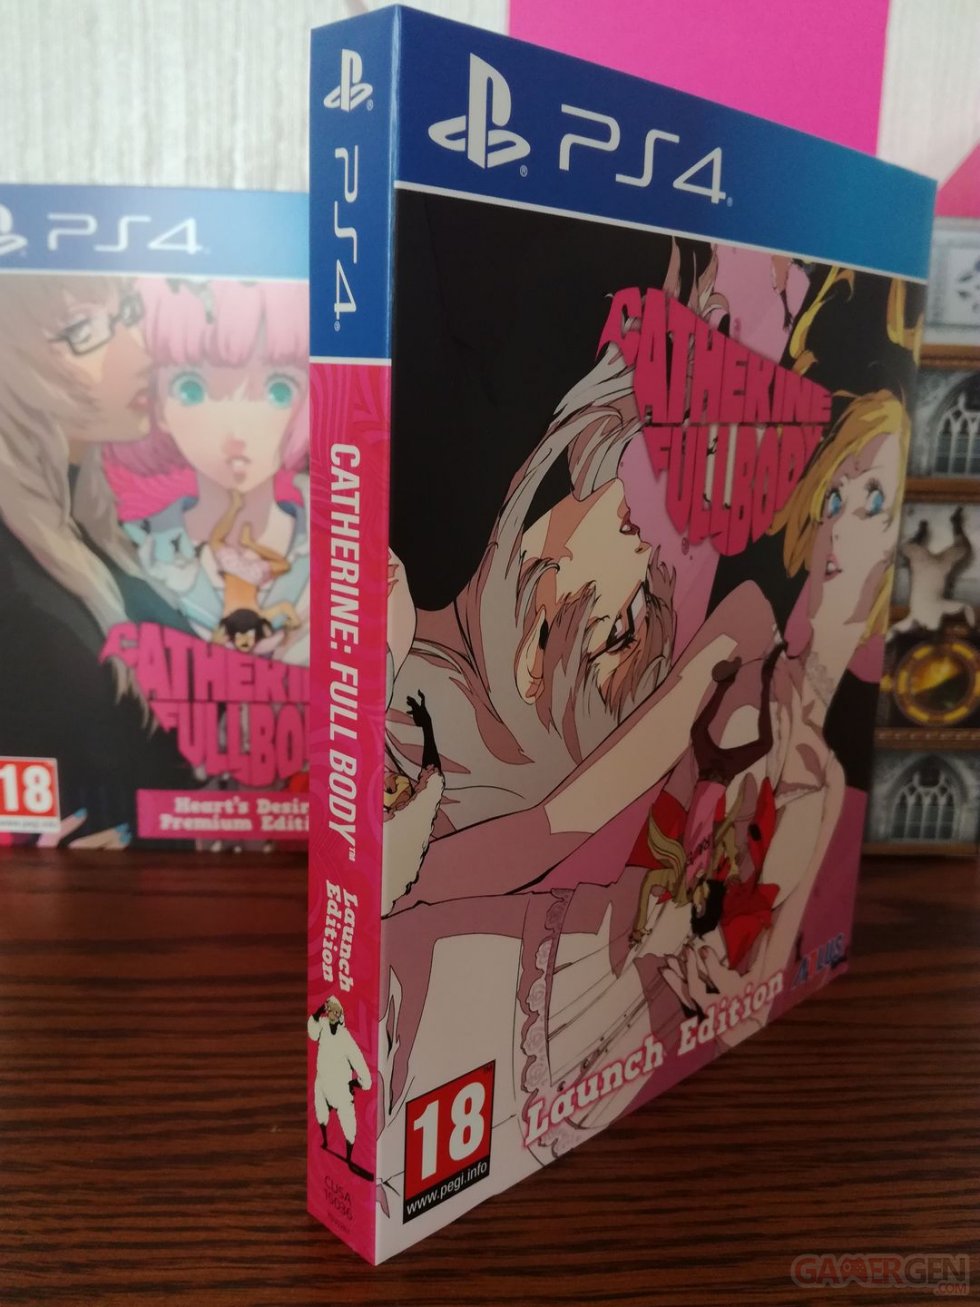 Catherine-Full-Body-unboxing-déballage-collector-Heart's-Desire-Premium-Edition-23-04-09-2019